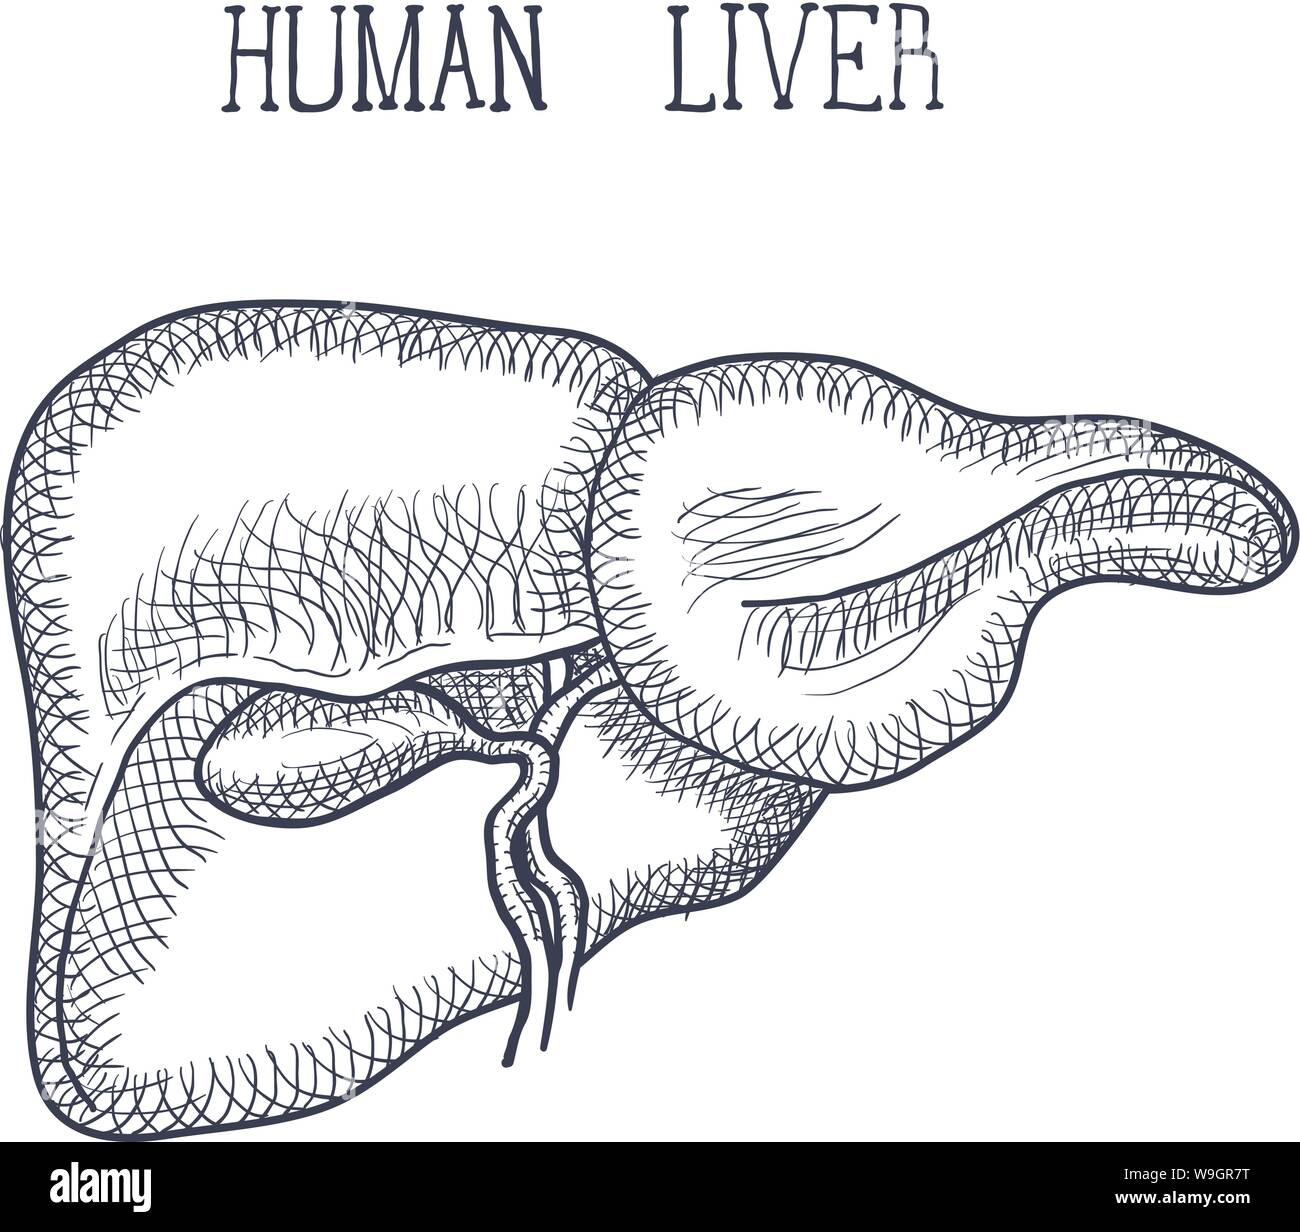 The liver | Canadian Cancer Society